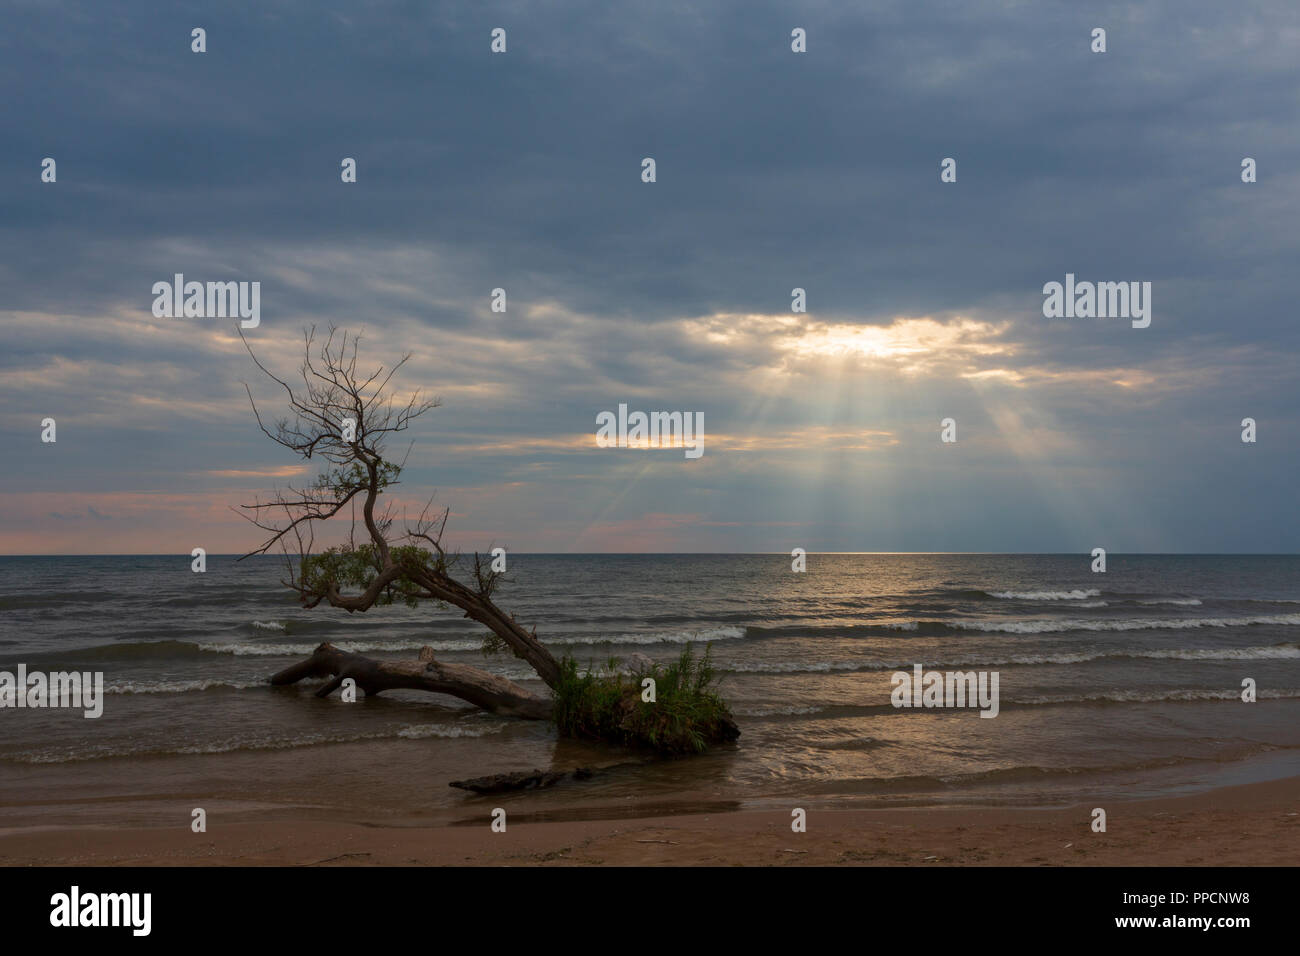 A ray of light breaks through a cloudy sky to illuminate a tree growing on a beach in Southwick Beach State Park, Ellisburg, New York State located on Stock Photo